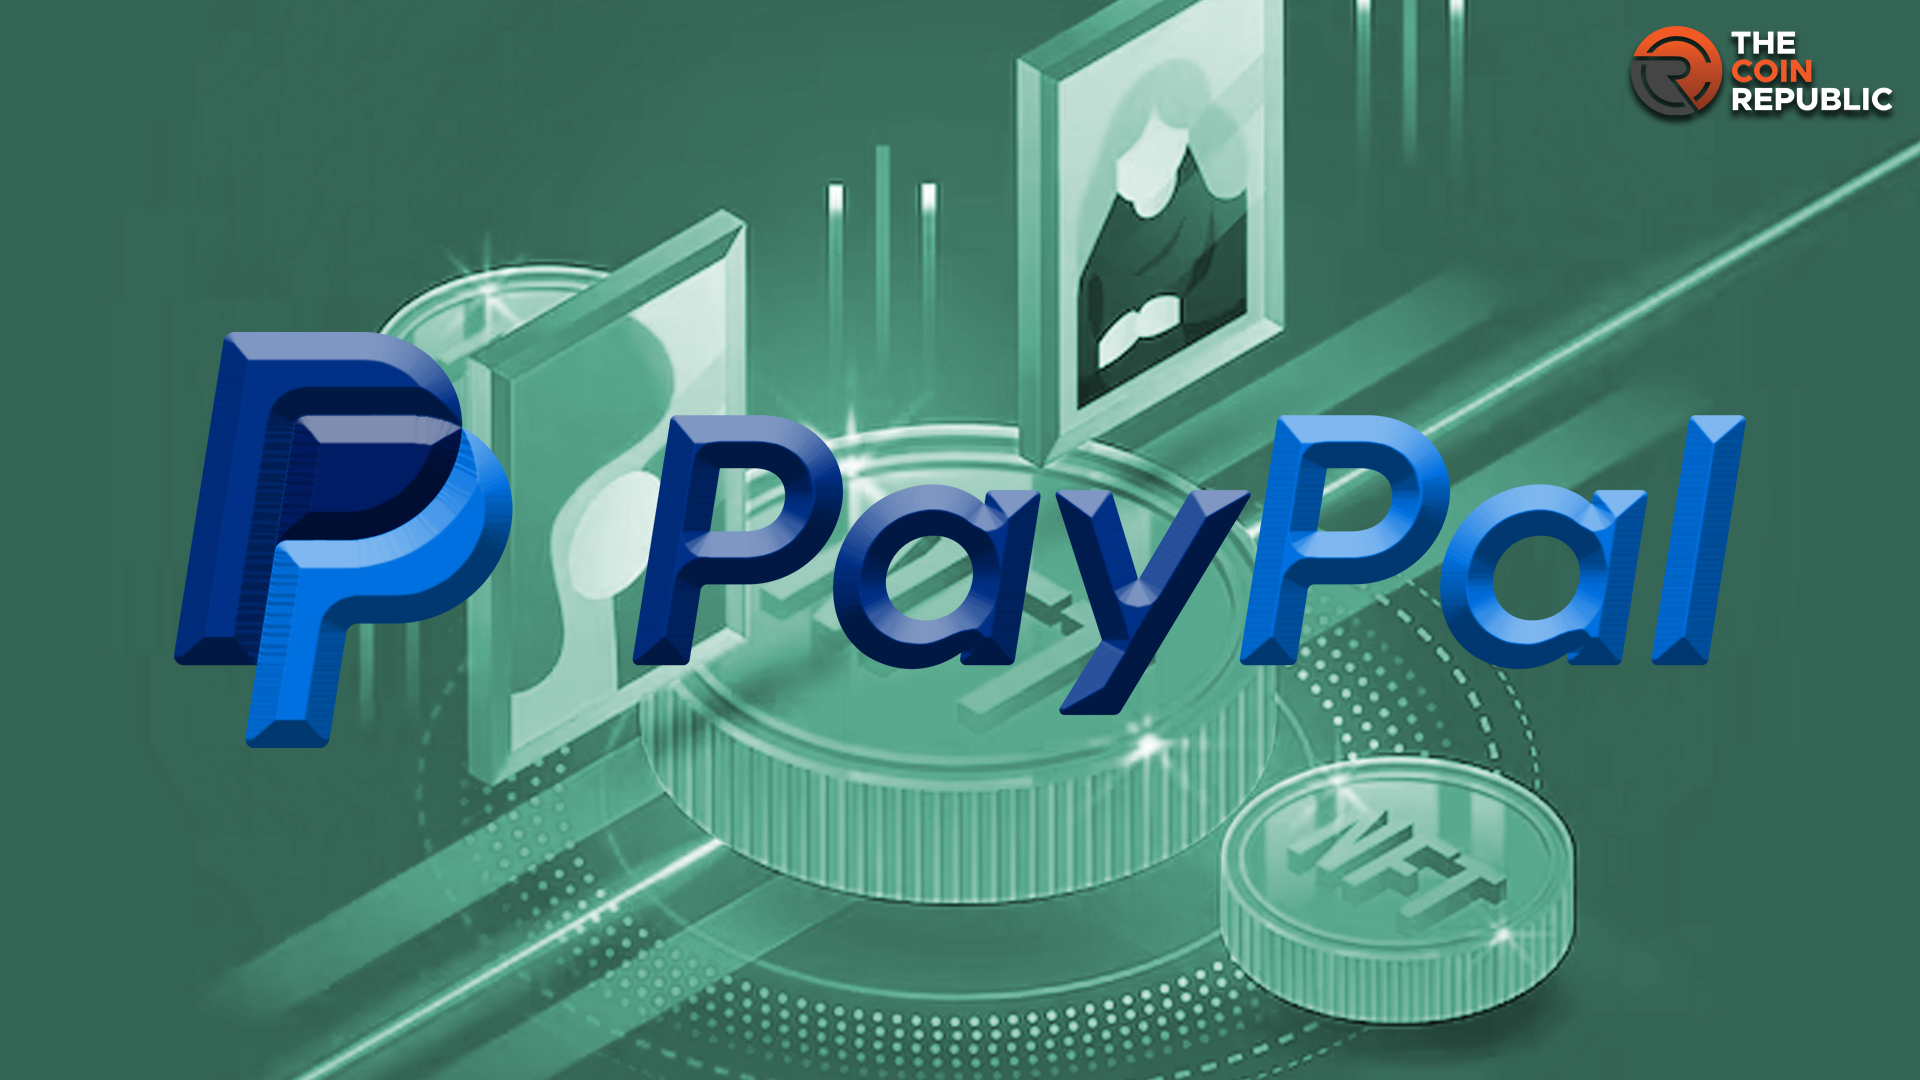 PayPal to Delve into NFT, Applied for NFT Marketplace Patent  